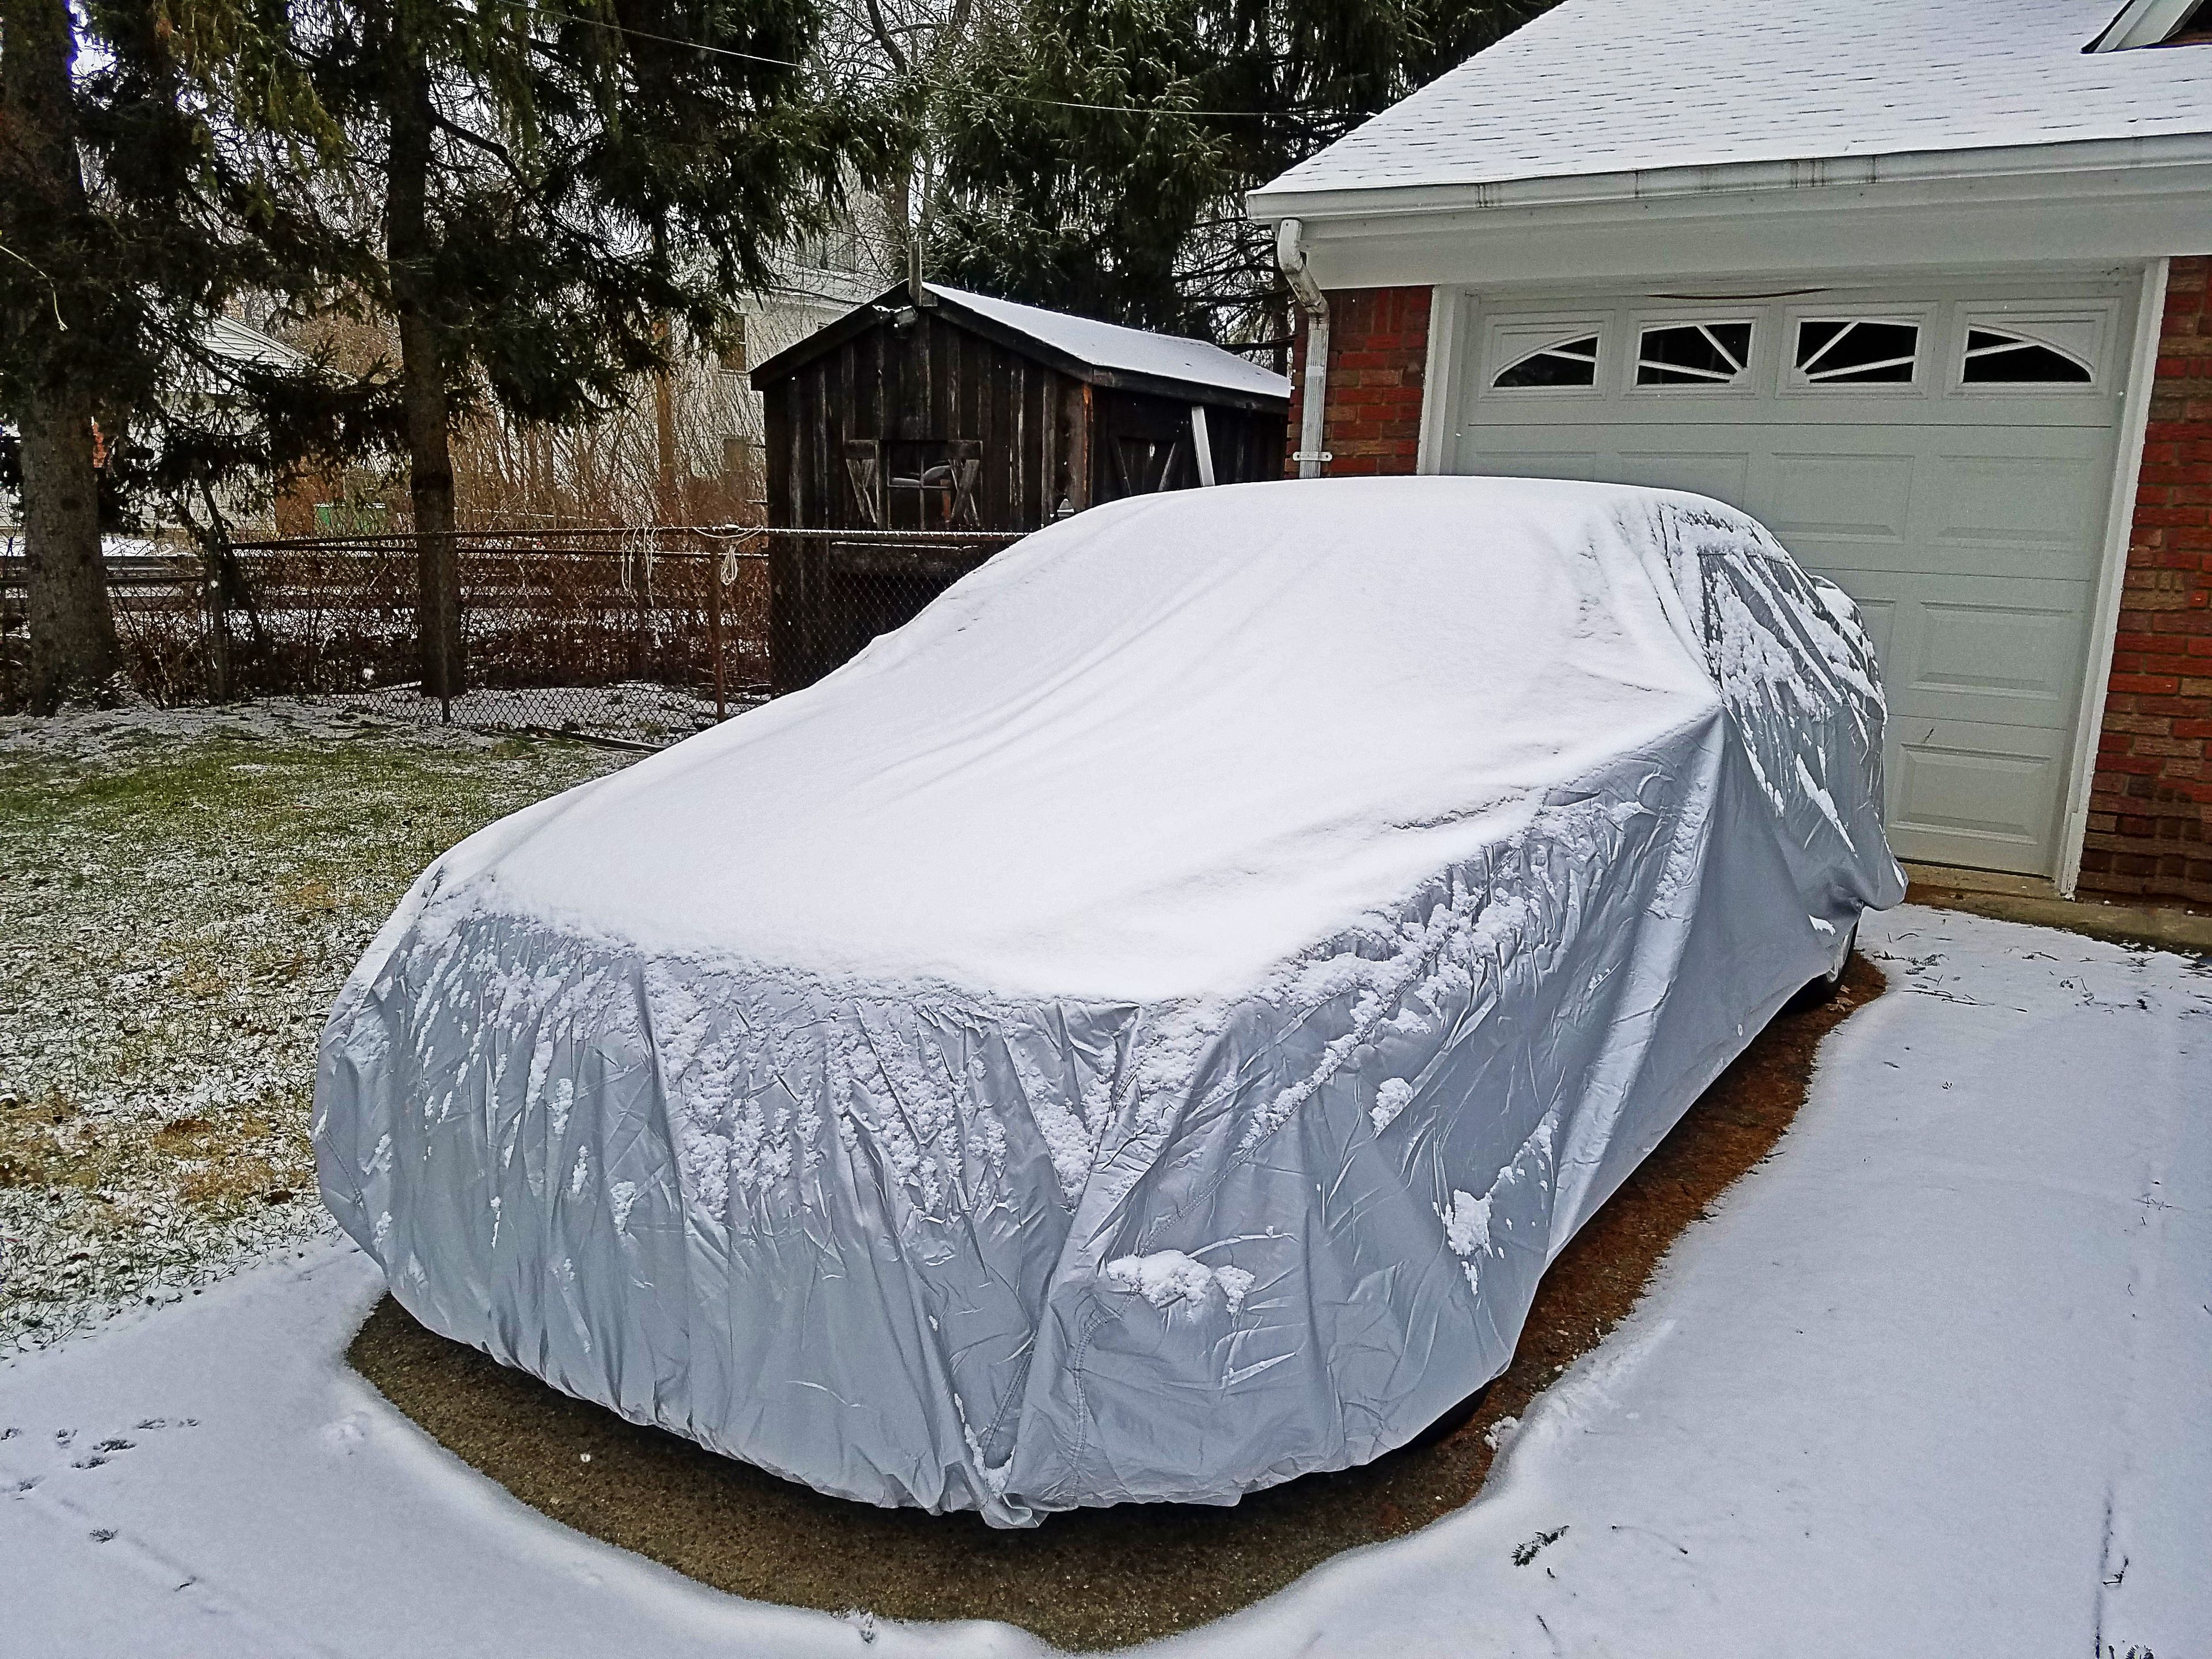 Winter Car Covers, Car Cover for Snow